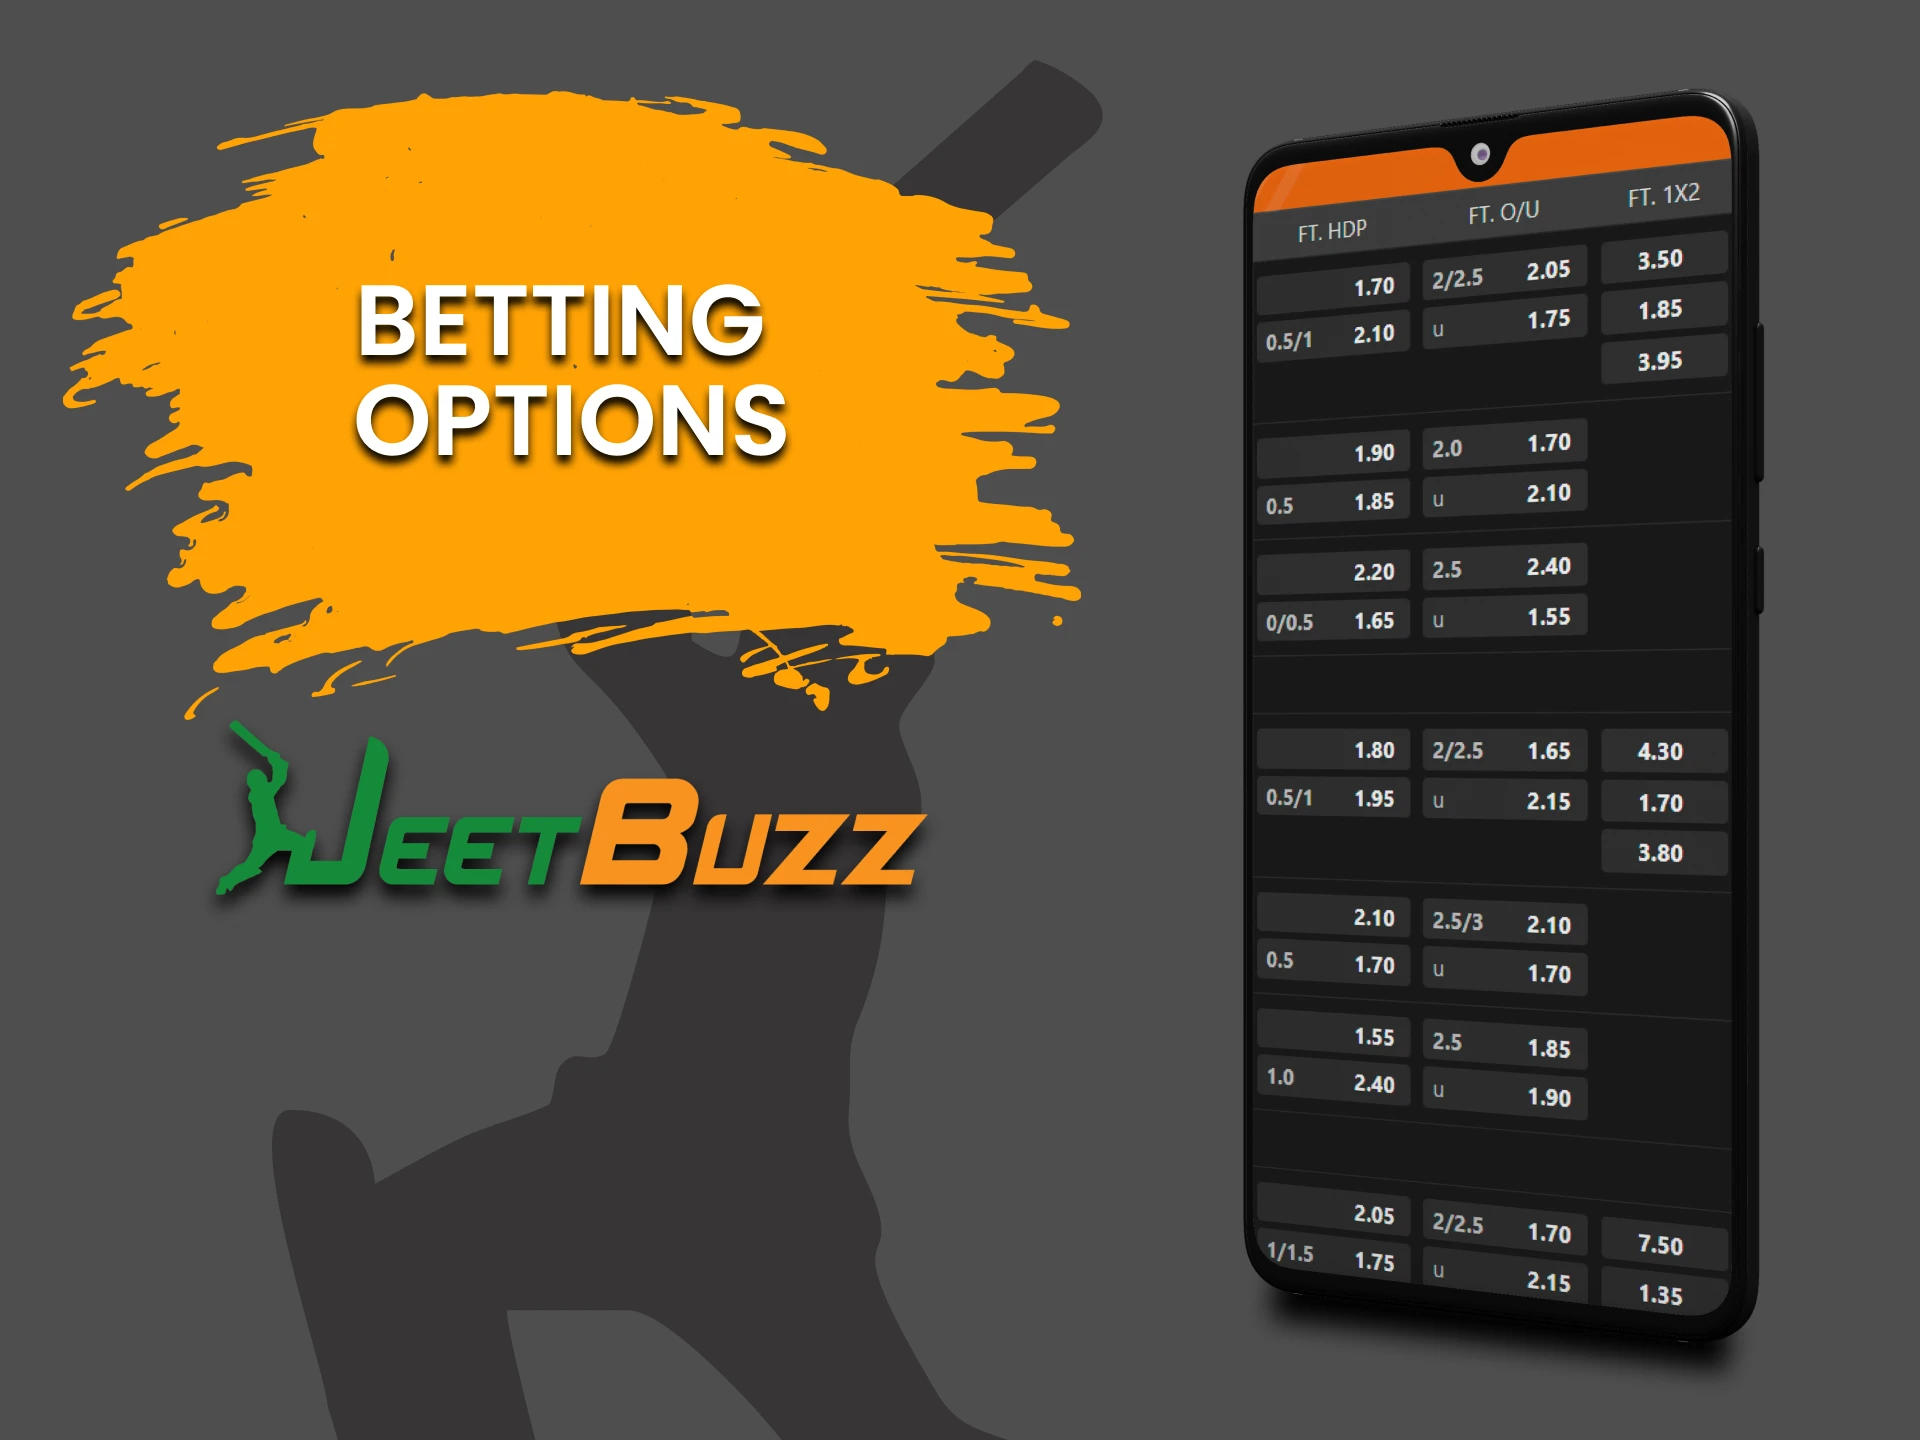 We'll tell you all about betting on JeetBuzz.